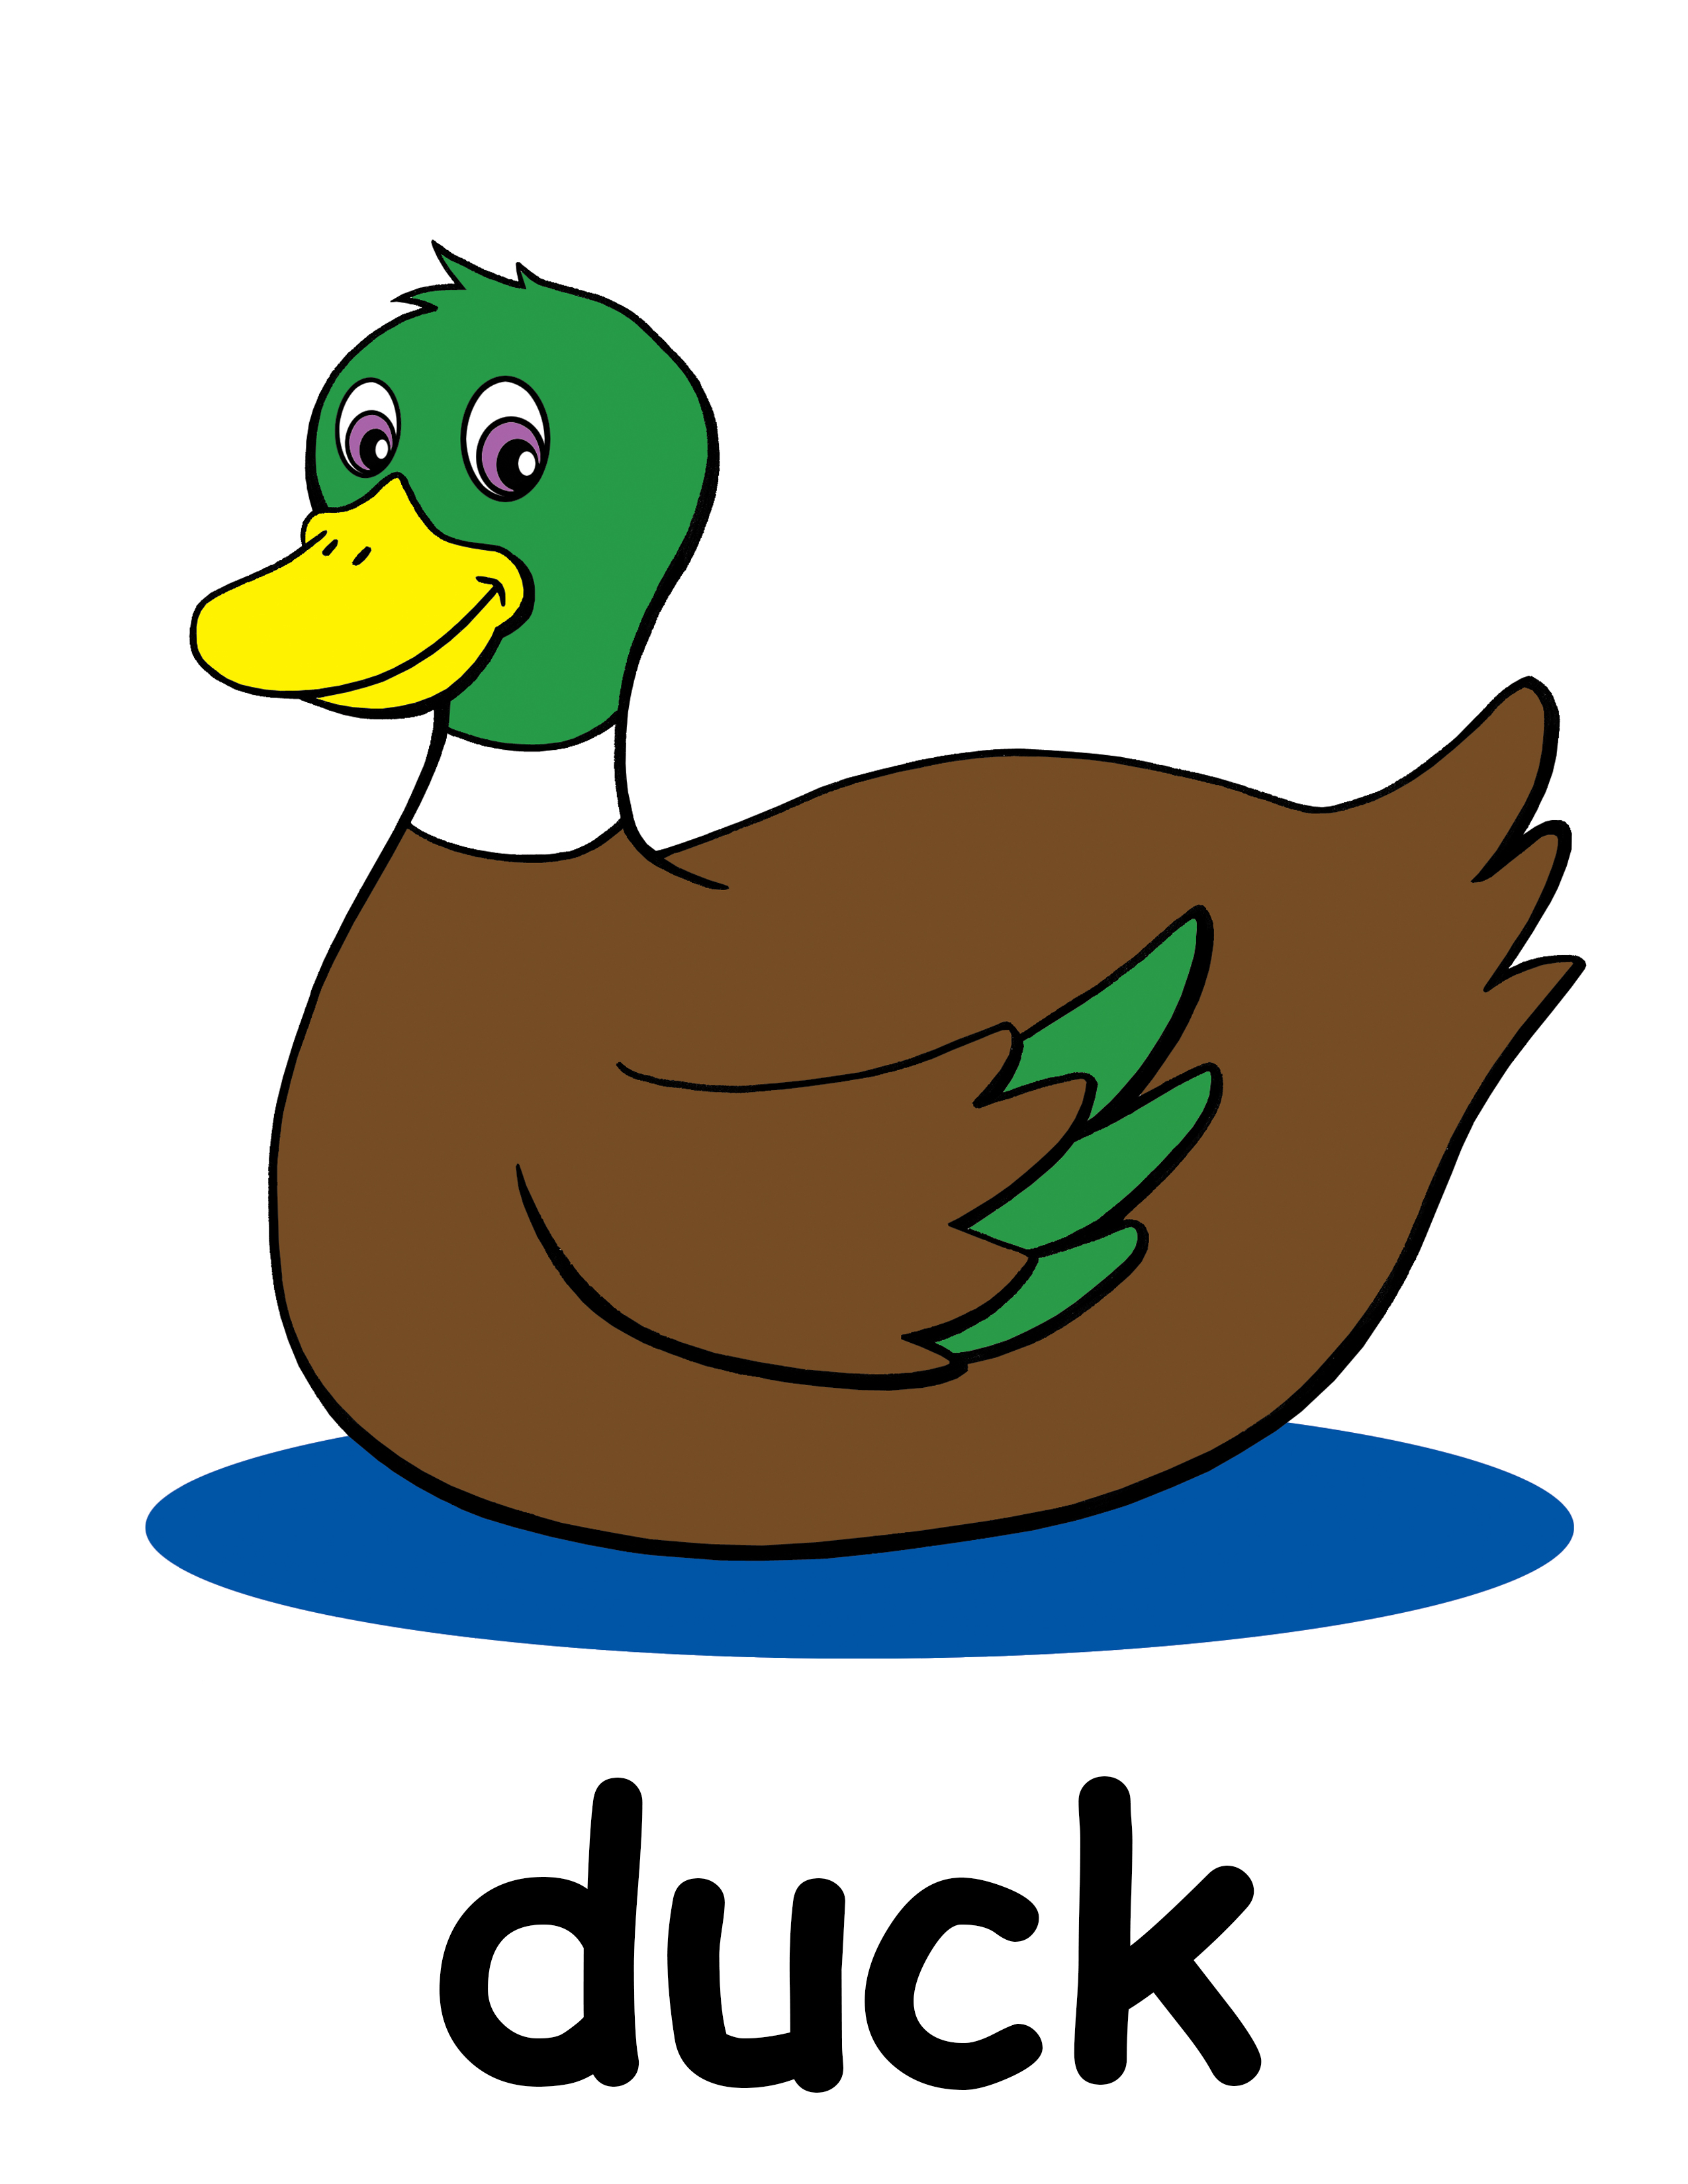 Duckling clipart farm animal. Free duck download clip